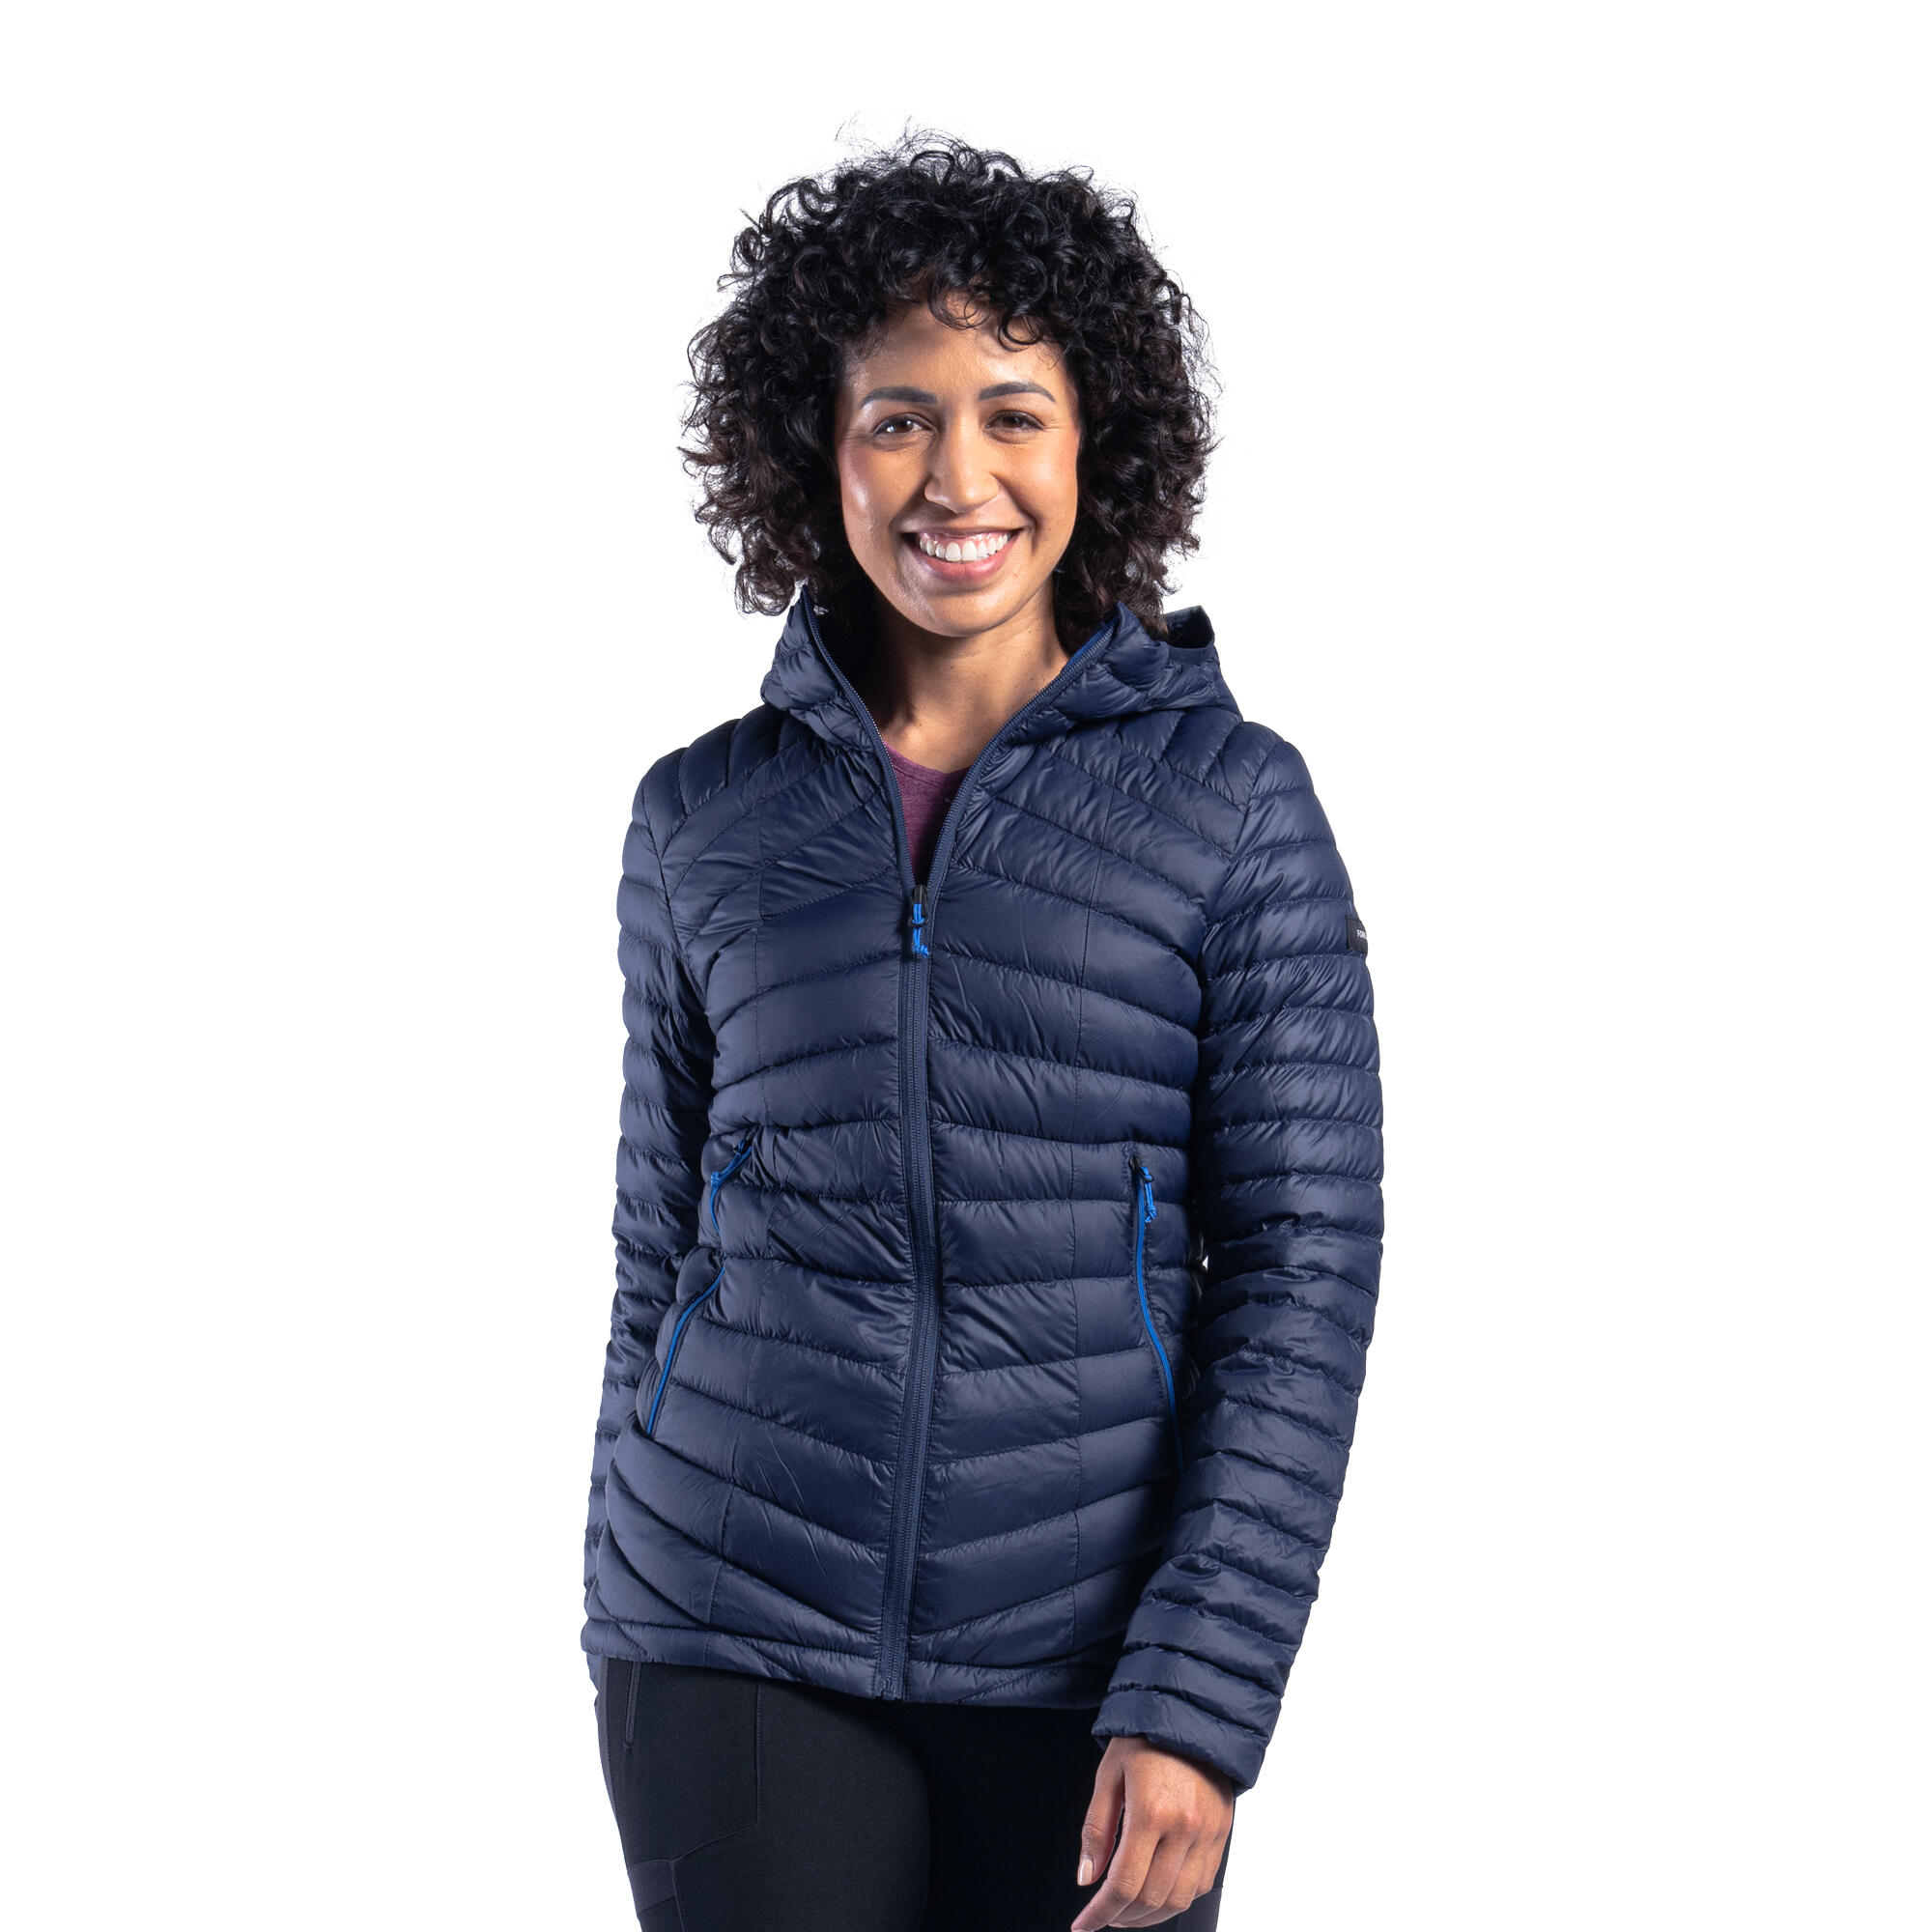 7% OFF on Domyos by Decathlon Full Sleeve Solid Women's Jacket on